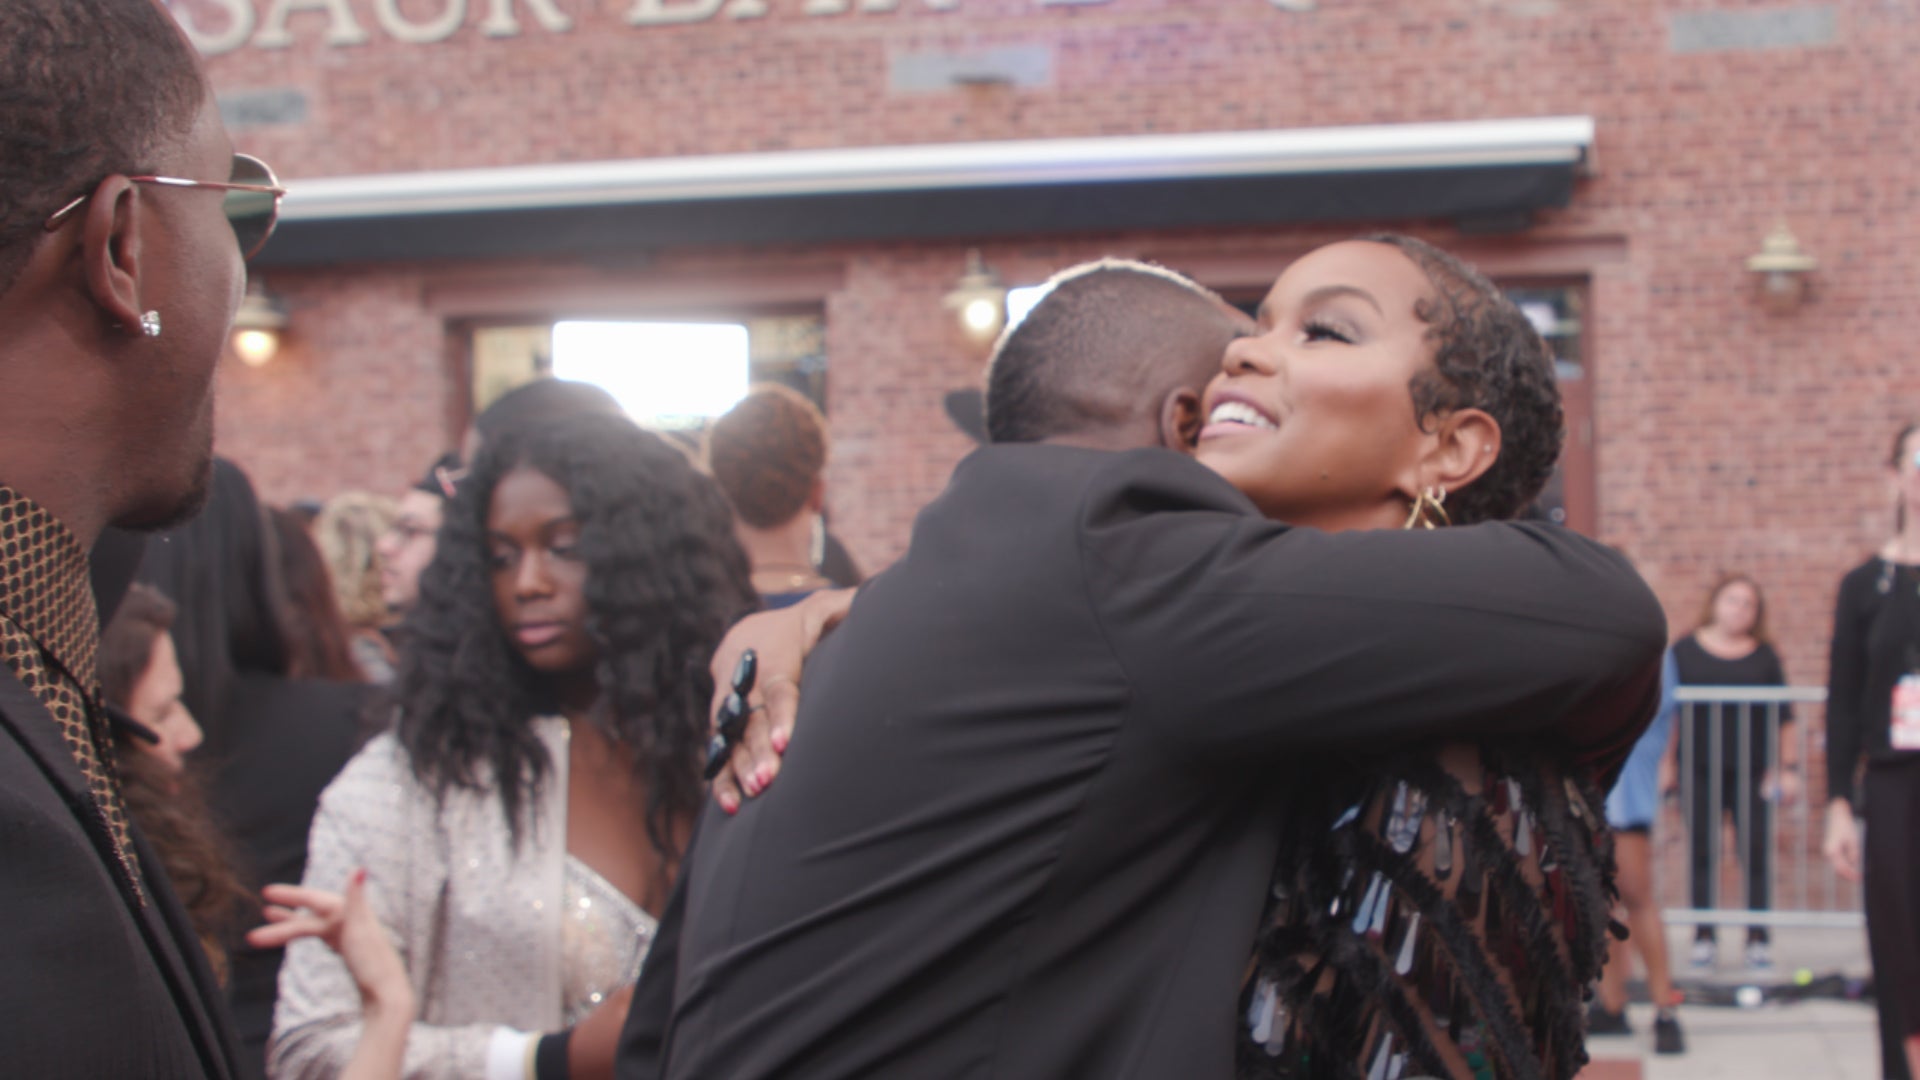 Screaming OMG Over This Heart-Warming LeToya Luckett And Wyclef Jean Reunion